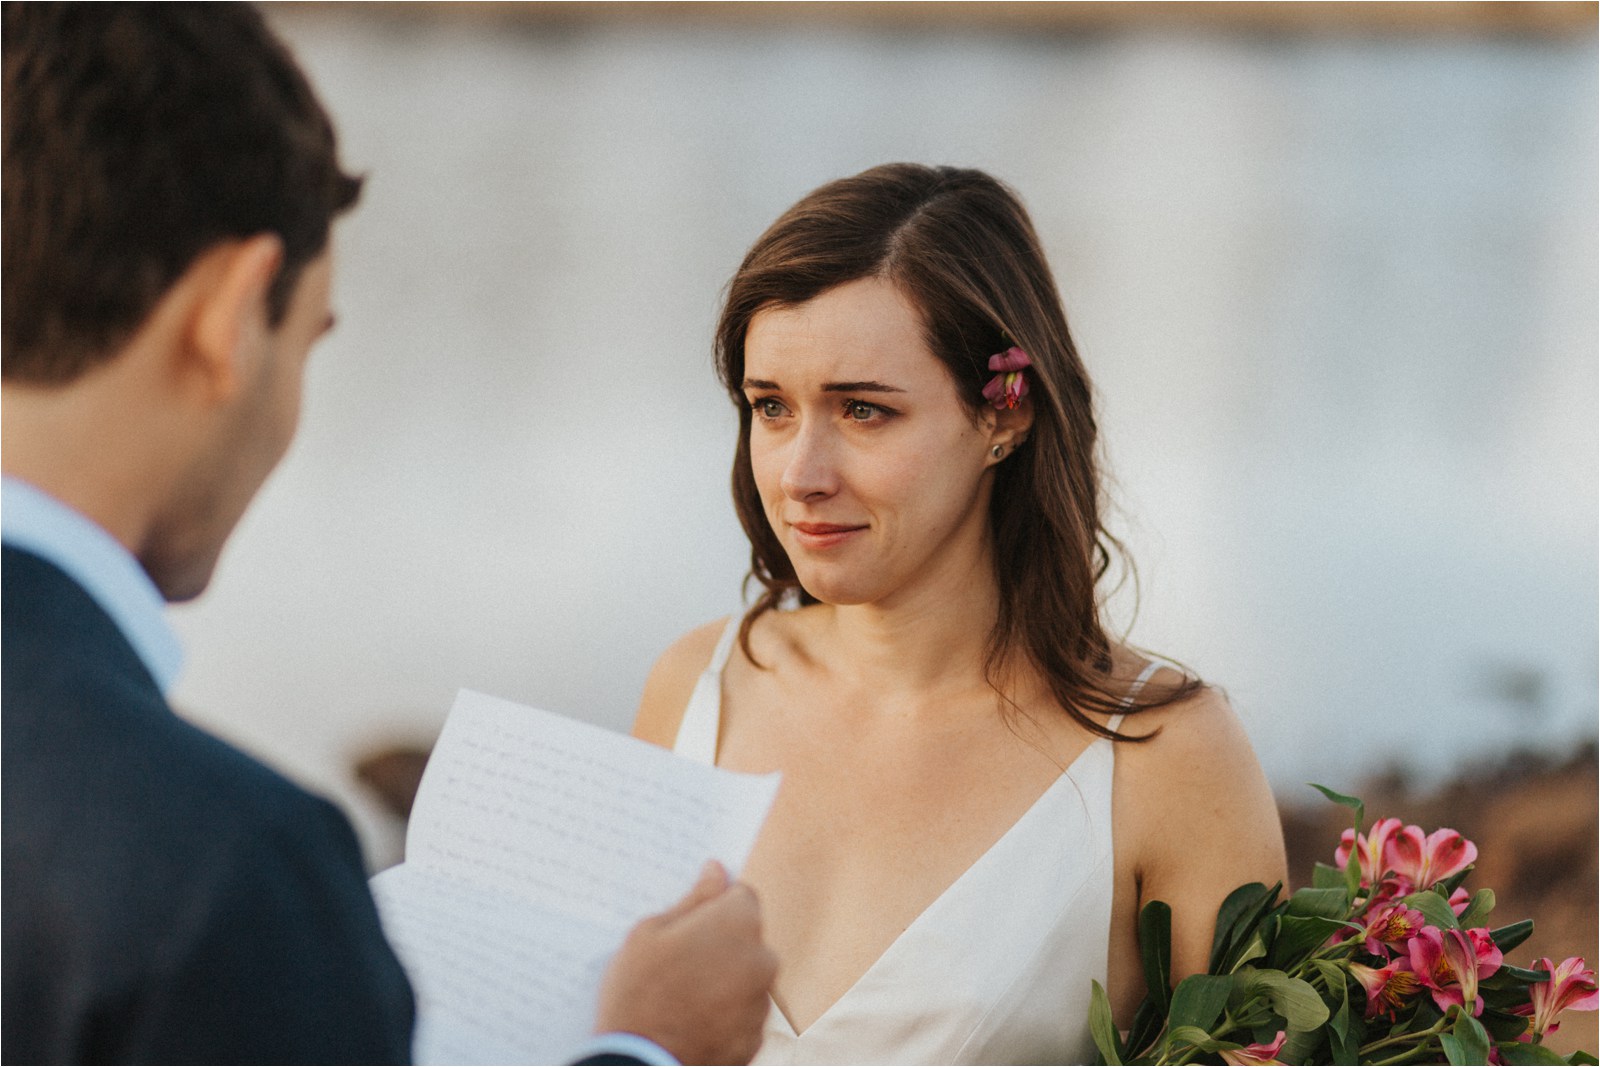 Emotional bride listening to her groom's vows to his bride during their elopement in Colorado.